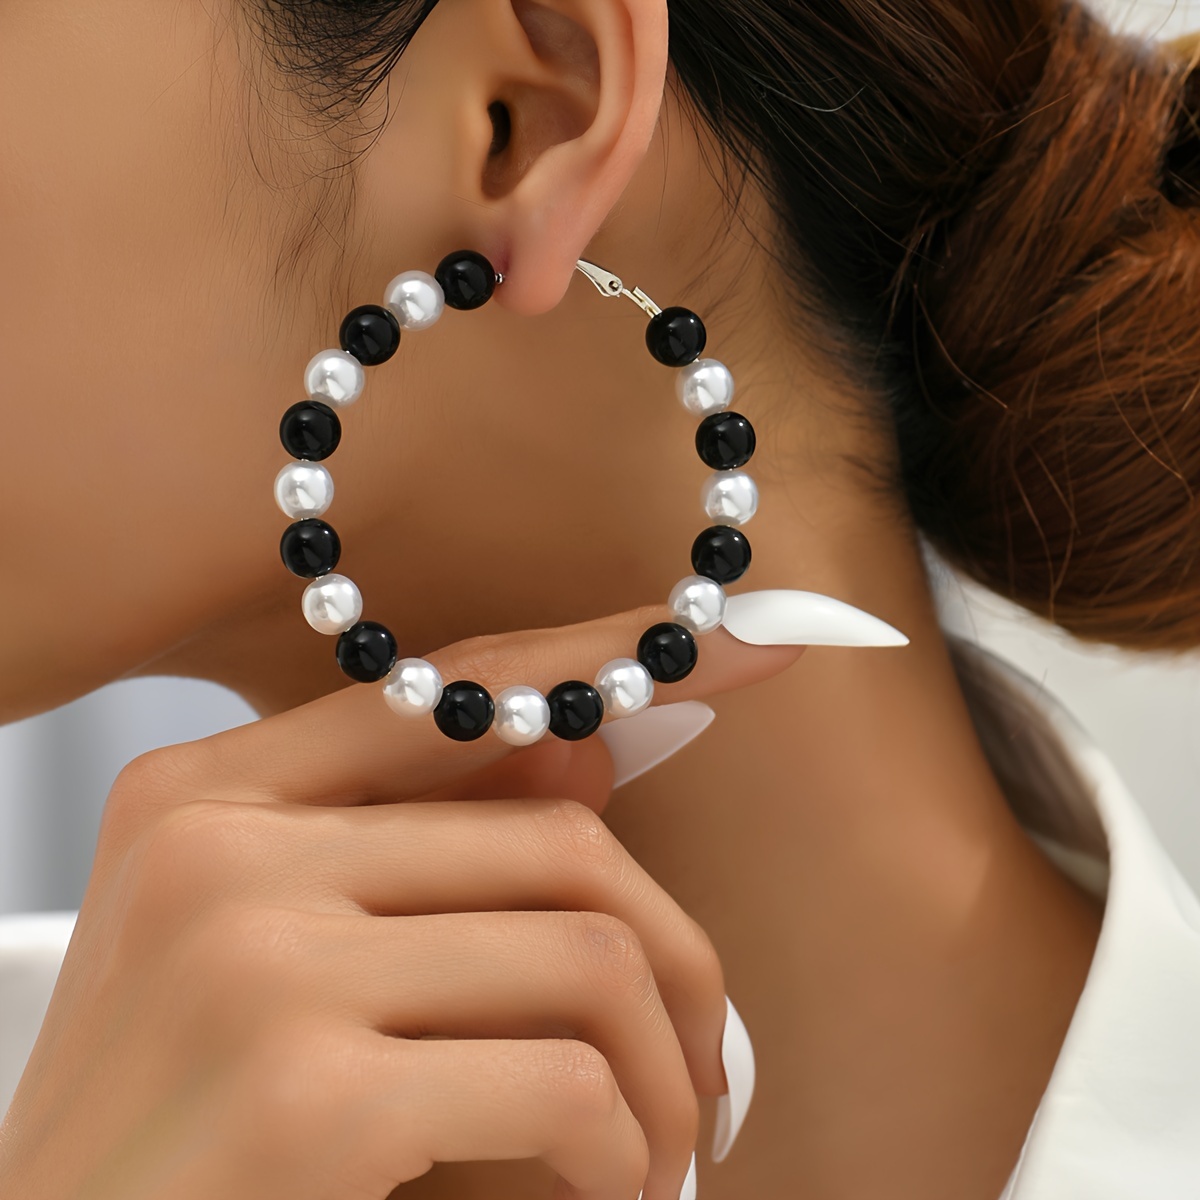 

Exquisite Imitation Pearl With Black Acrylic Beads Design Hoop Earrings Bohemian Elegant Leisure Style Match Female Daily Outfits